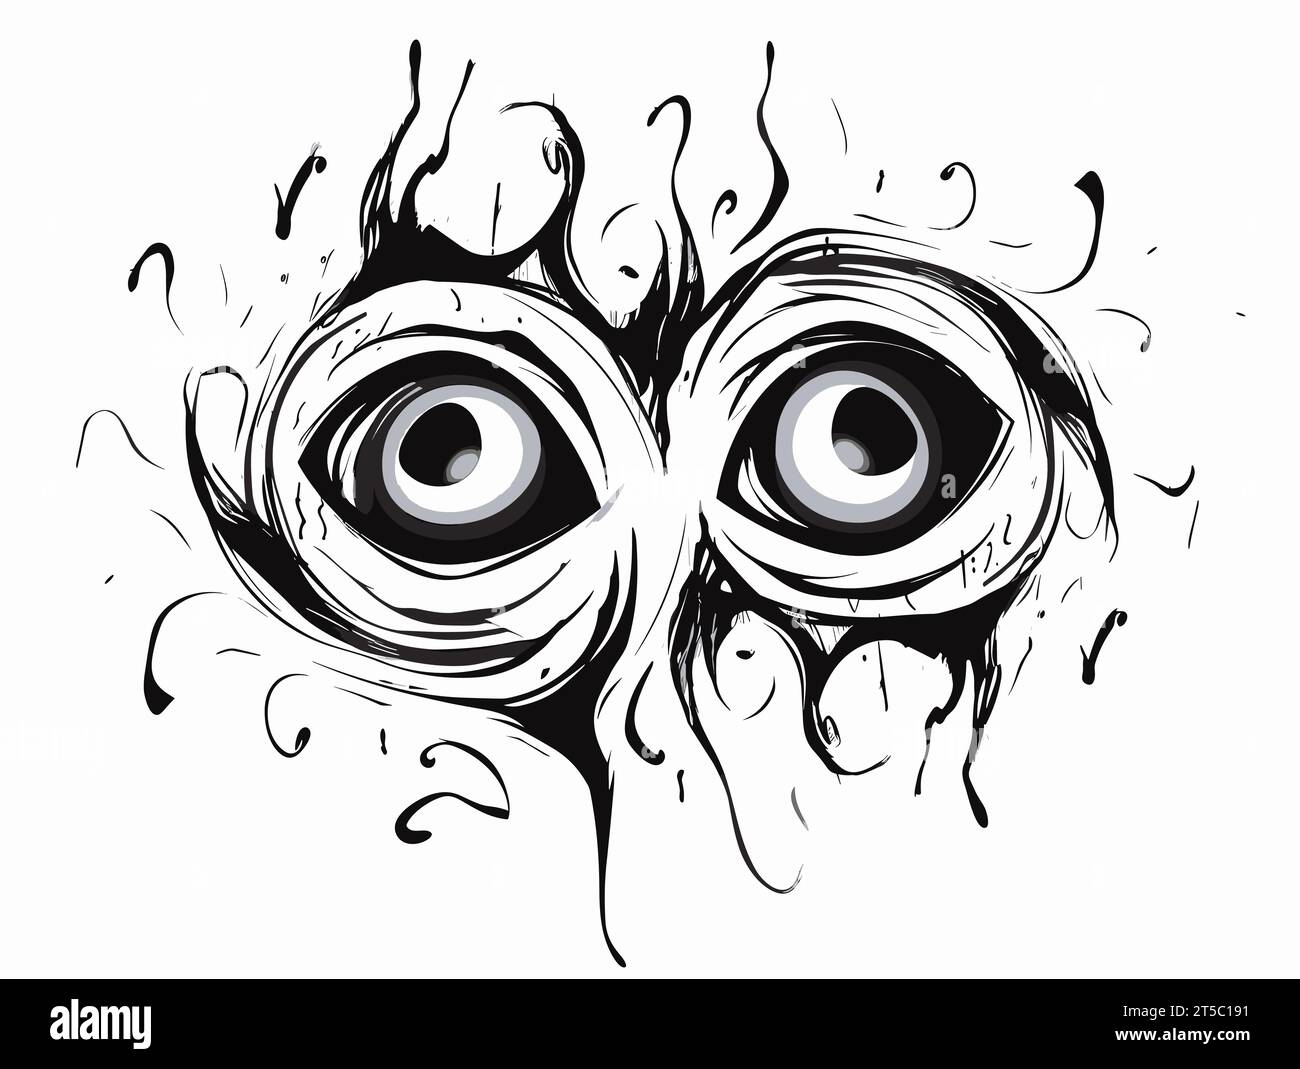 Drawing of Cartoon black ink blot with eyes illustration separated, sweeping overdrawn lines. Stock Vector